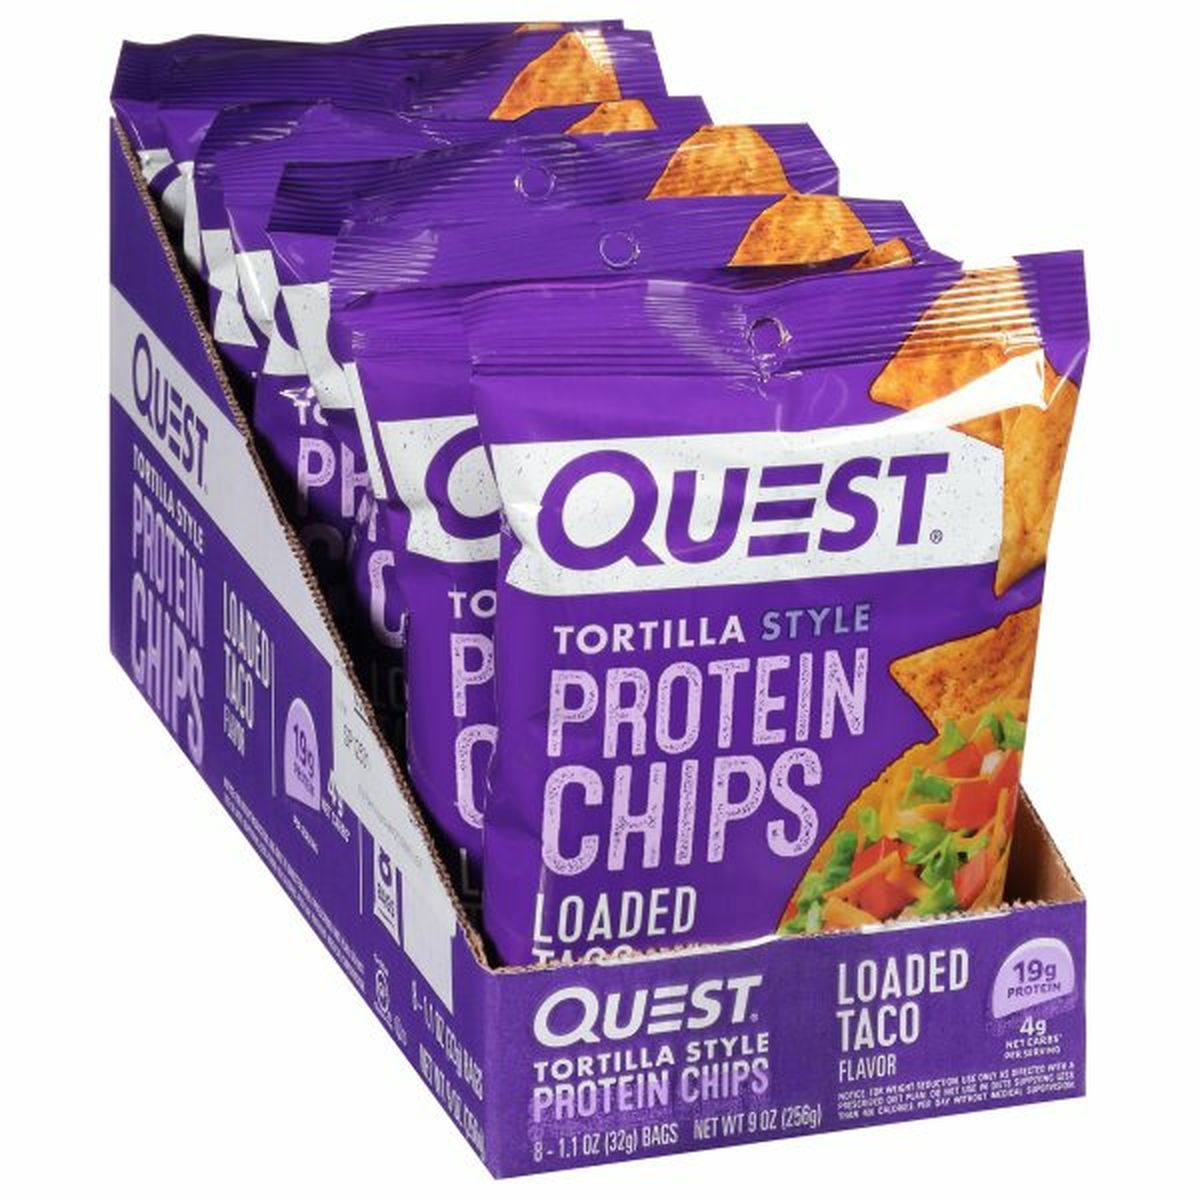 Calories in Quest Protein Chips, Tortilla Style, Loaded Taco Flavor